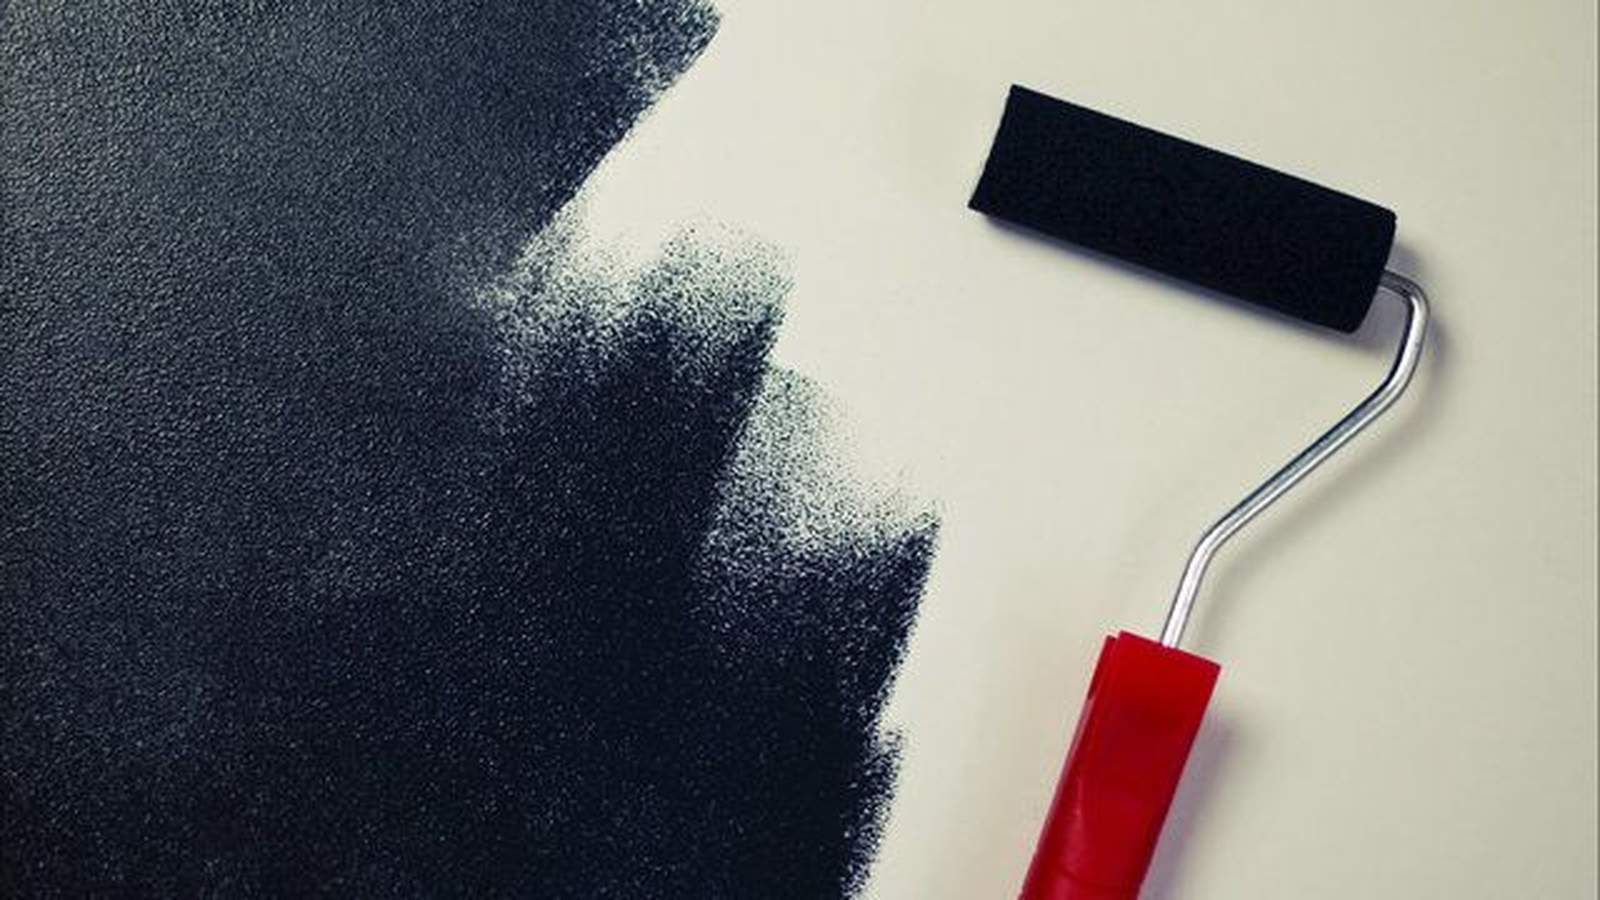 Transform your home and even your car with one can of this paint